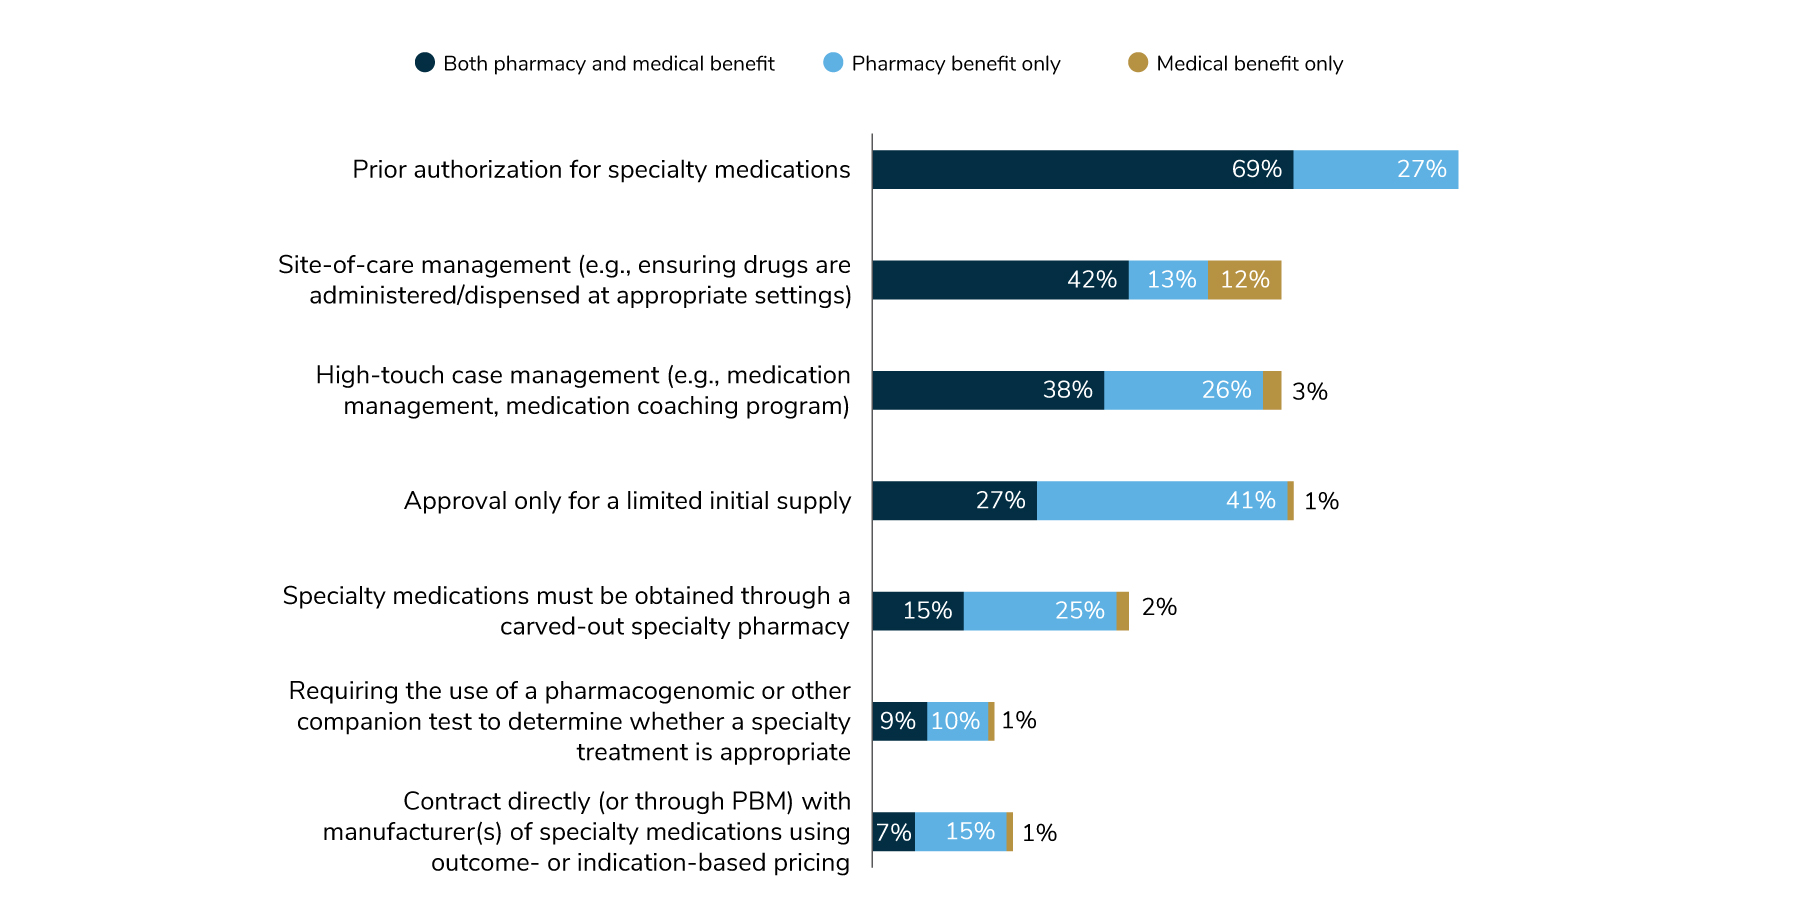 Employers use the following methods to manage specialty pharmacy: Prior authorization (96%), approval of a limited supply (69%), high-touch case management (67%) and site-of-care management (67%).